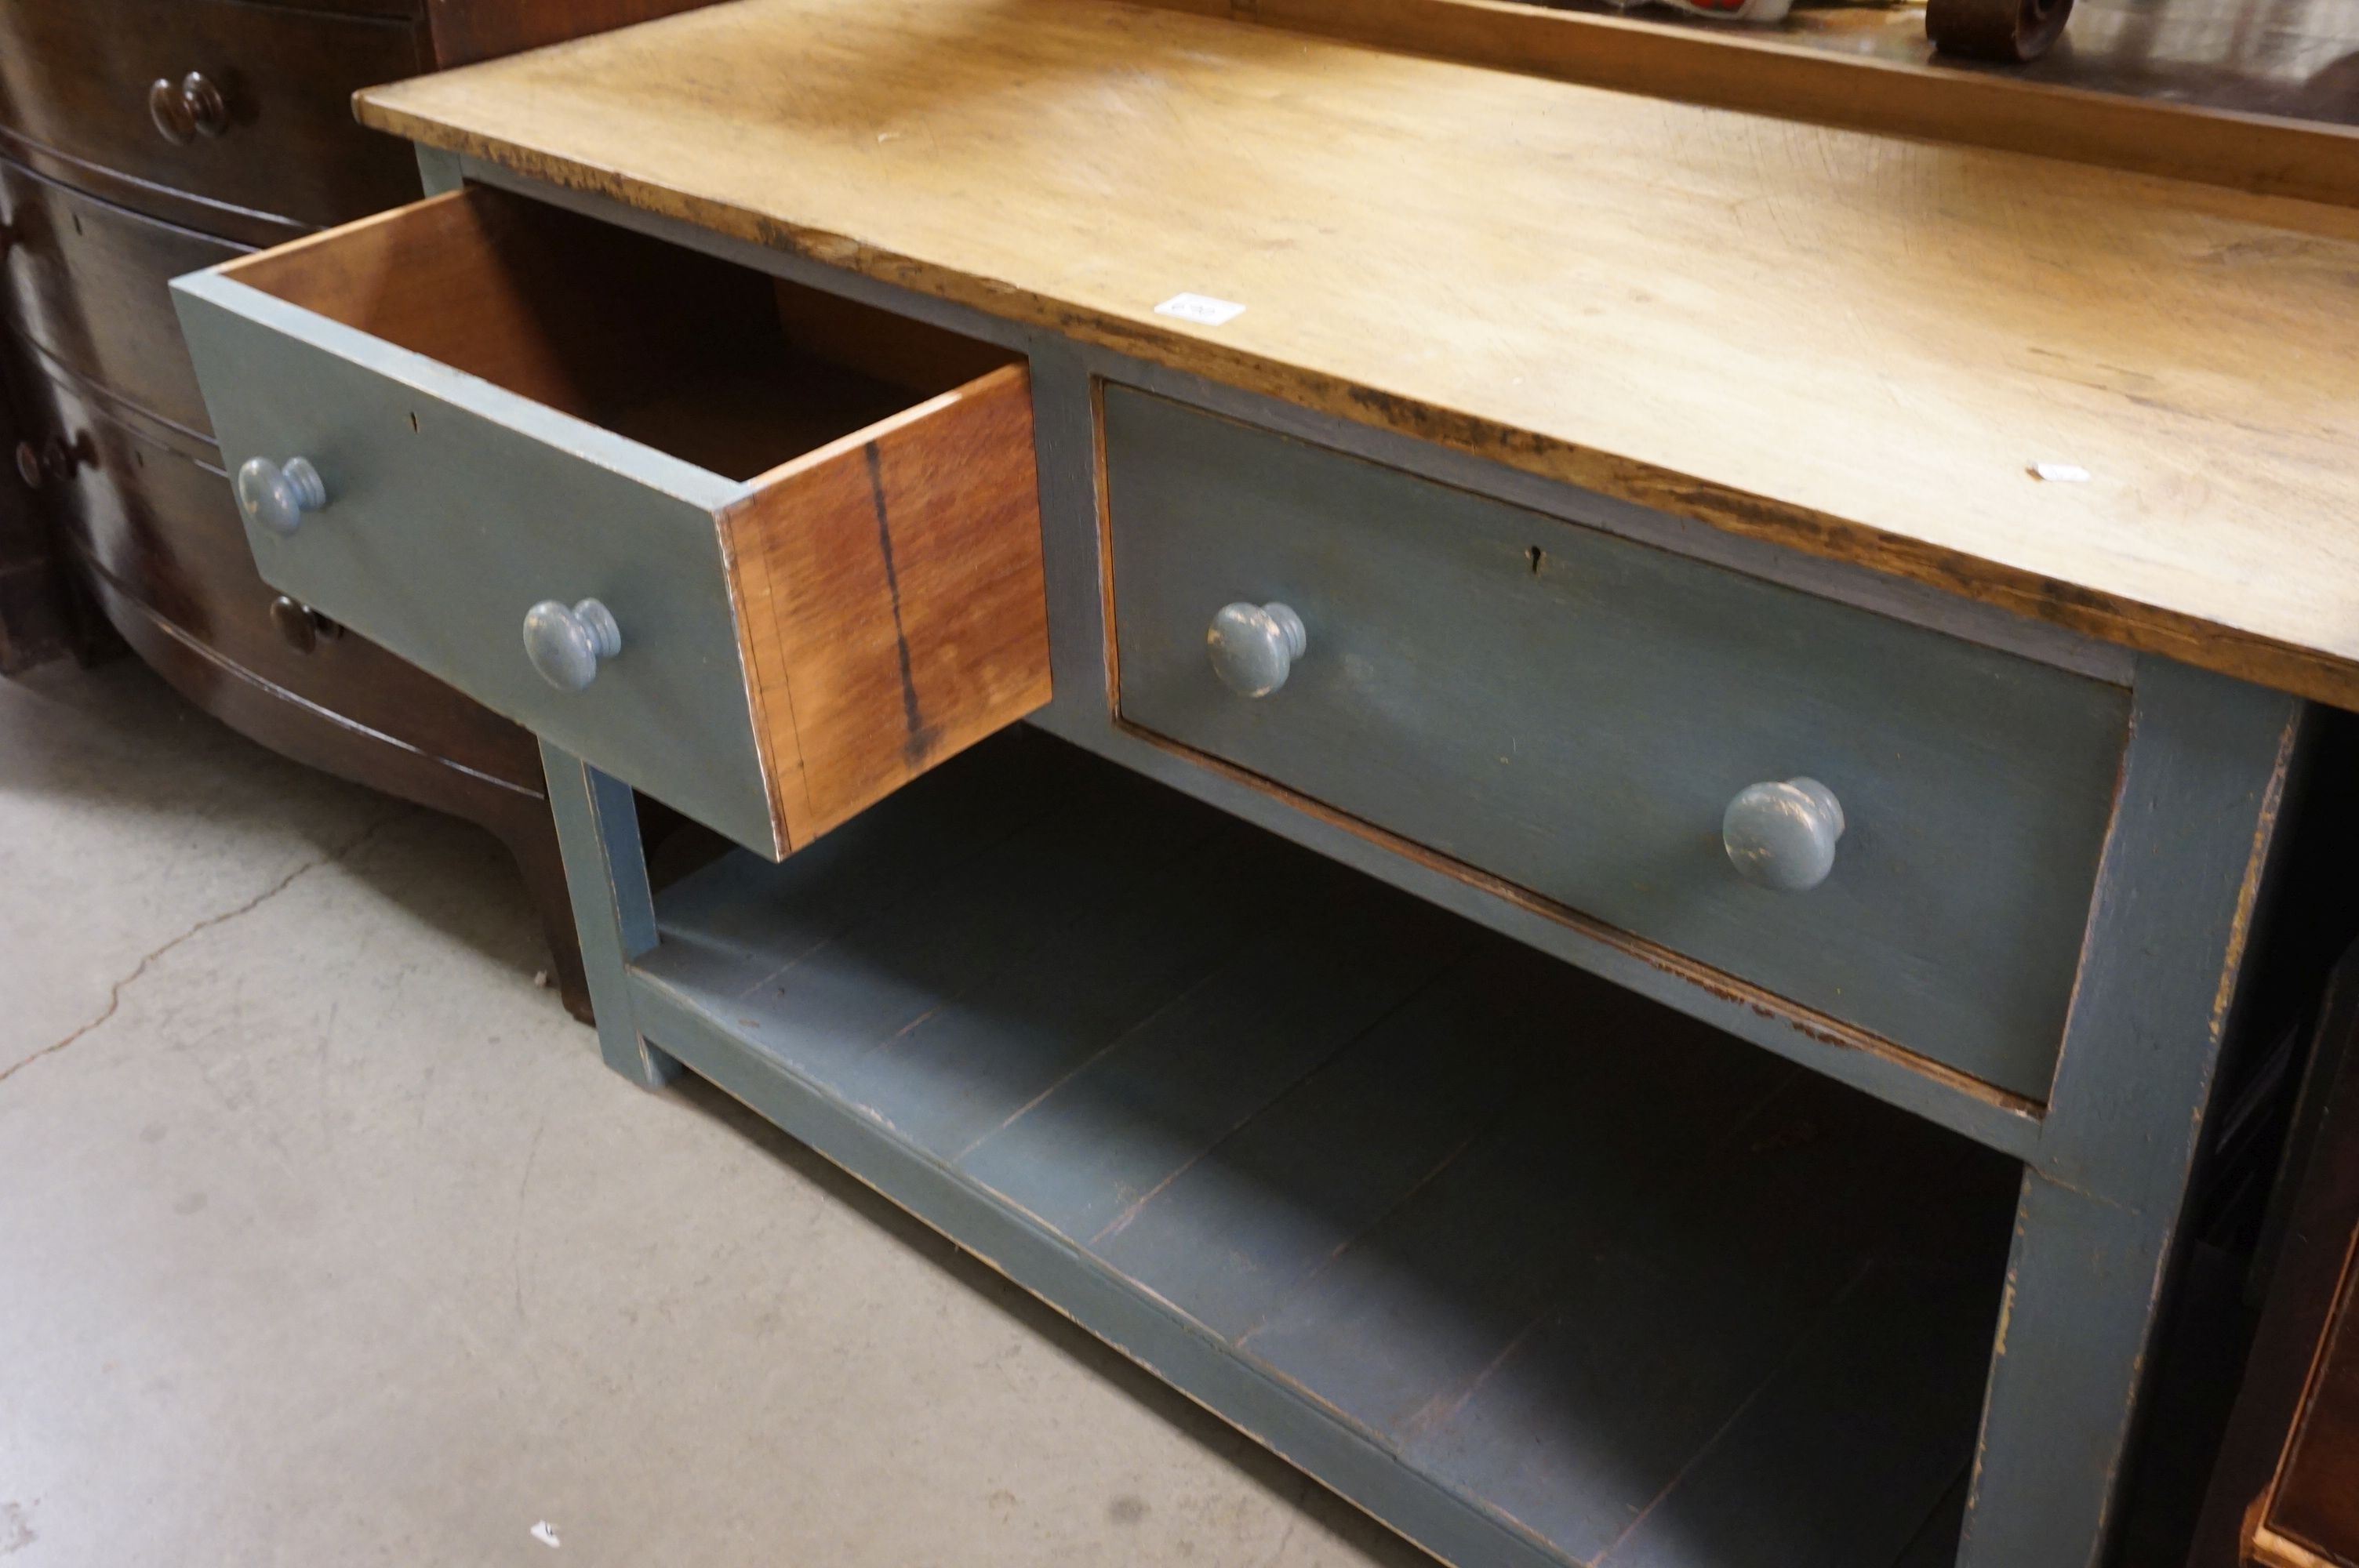 Ex Bakery Two Drawer Kitchen Work Table with undershelf - Image 2 of 4